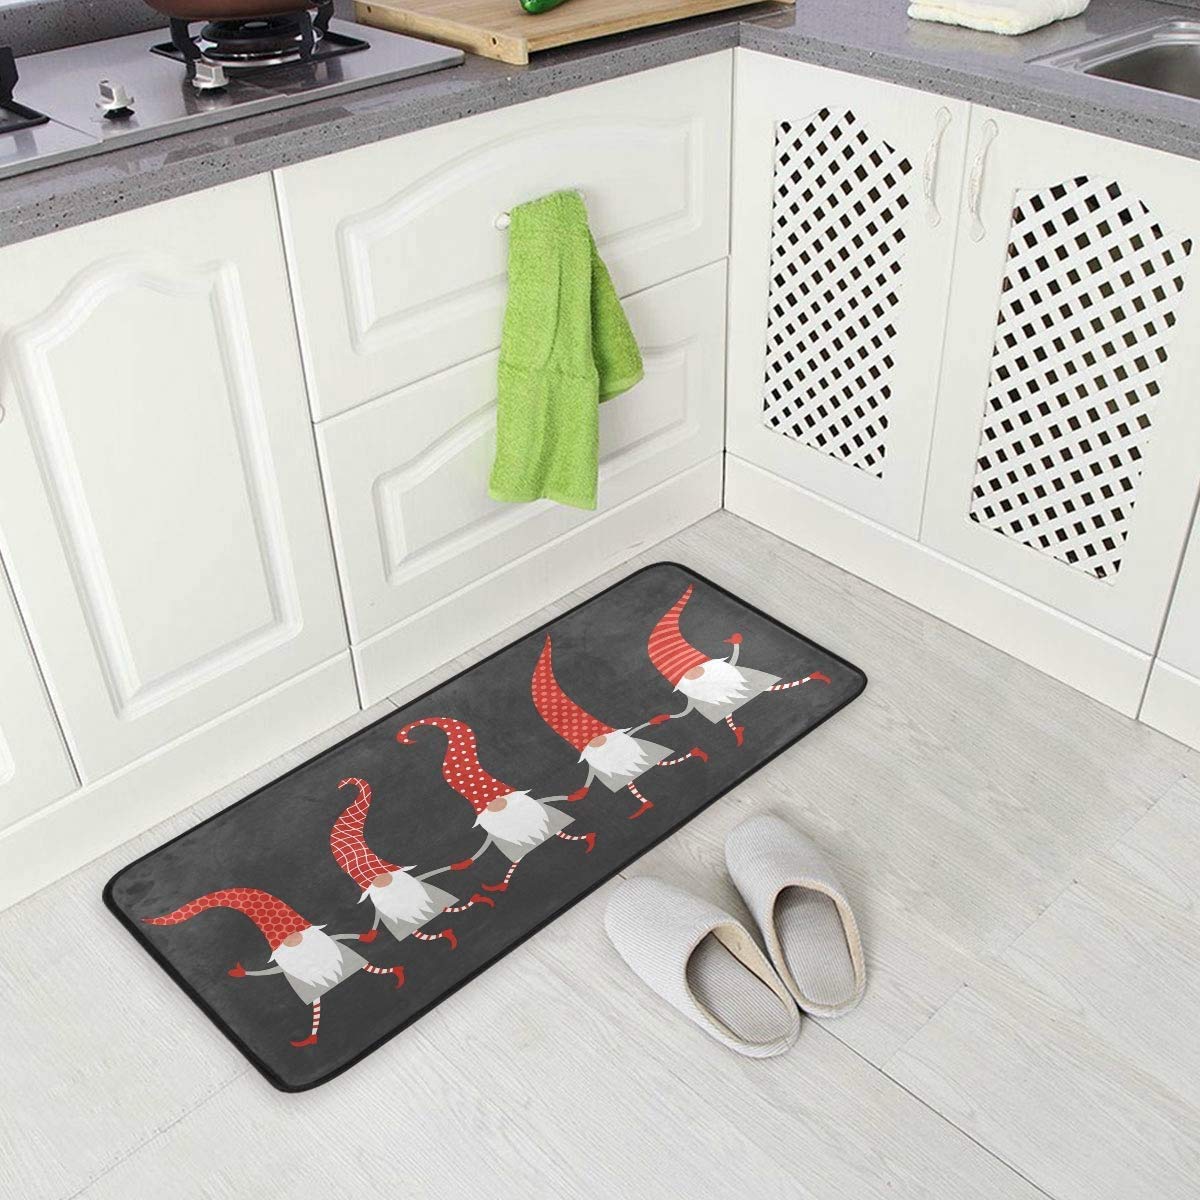 susiyo Kitchen Mat Cute Christmas Gnomes in Red Hats Kitchen Rug Mat Anti-Fatigue Comfort Floor Mat Non Slip Oil Stain Resistant Easy to Clean Kitchen Rug Bath Rug Carpet for Indoor Outdoor Doormat